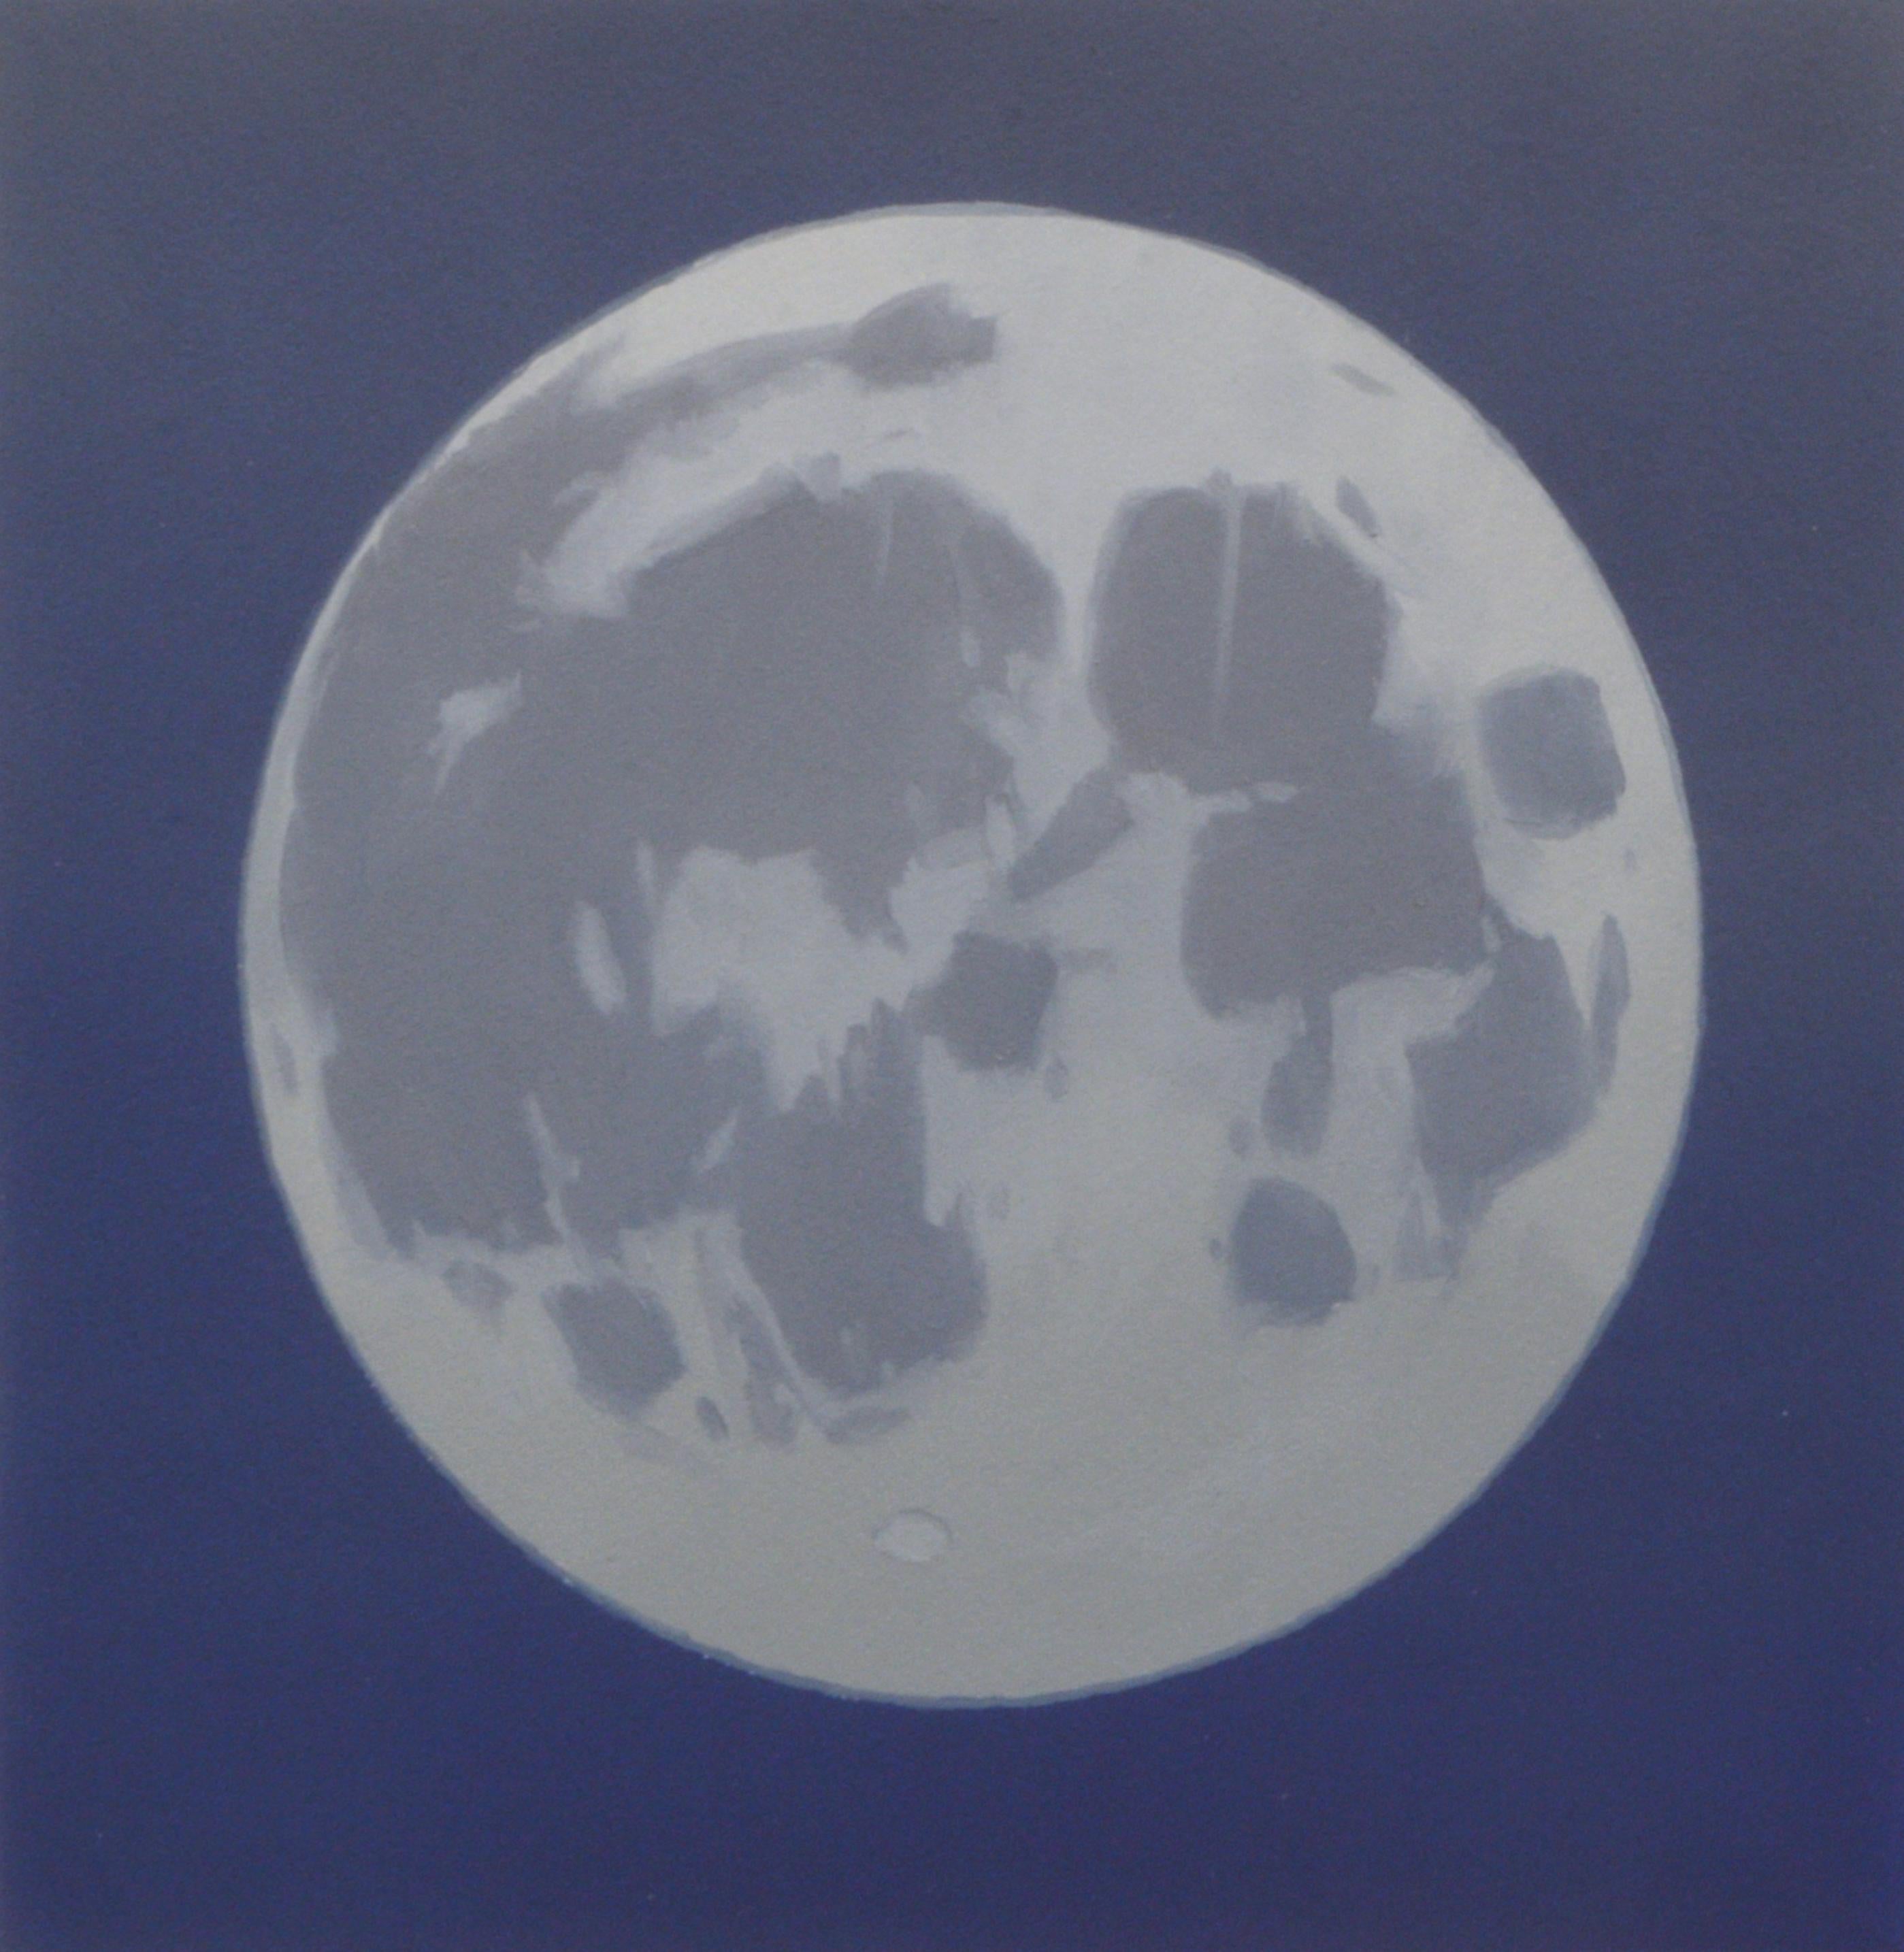 Paper Moon 3 - Painting by Beau Carey